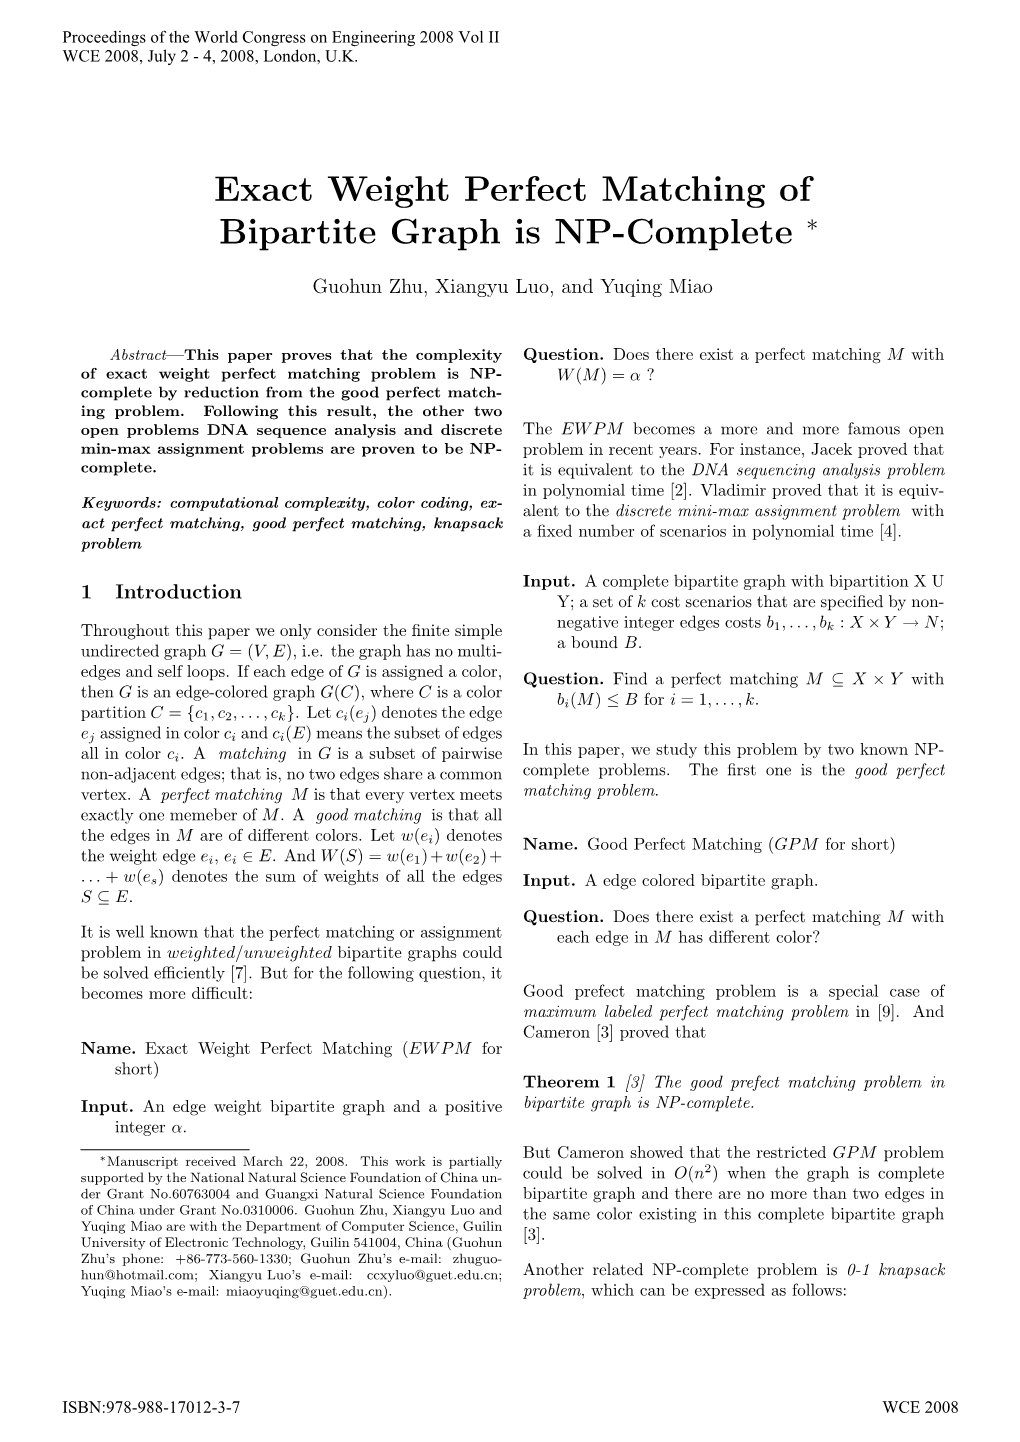 Exact Weight Perfect Matching of Bipartite Graph Is NP-Complete ∗